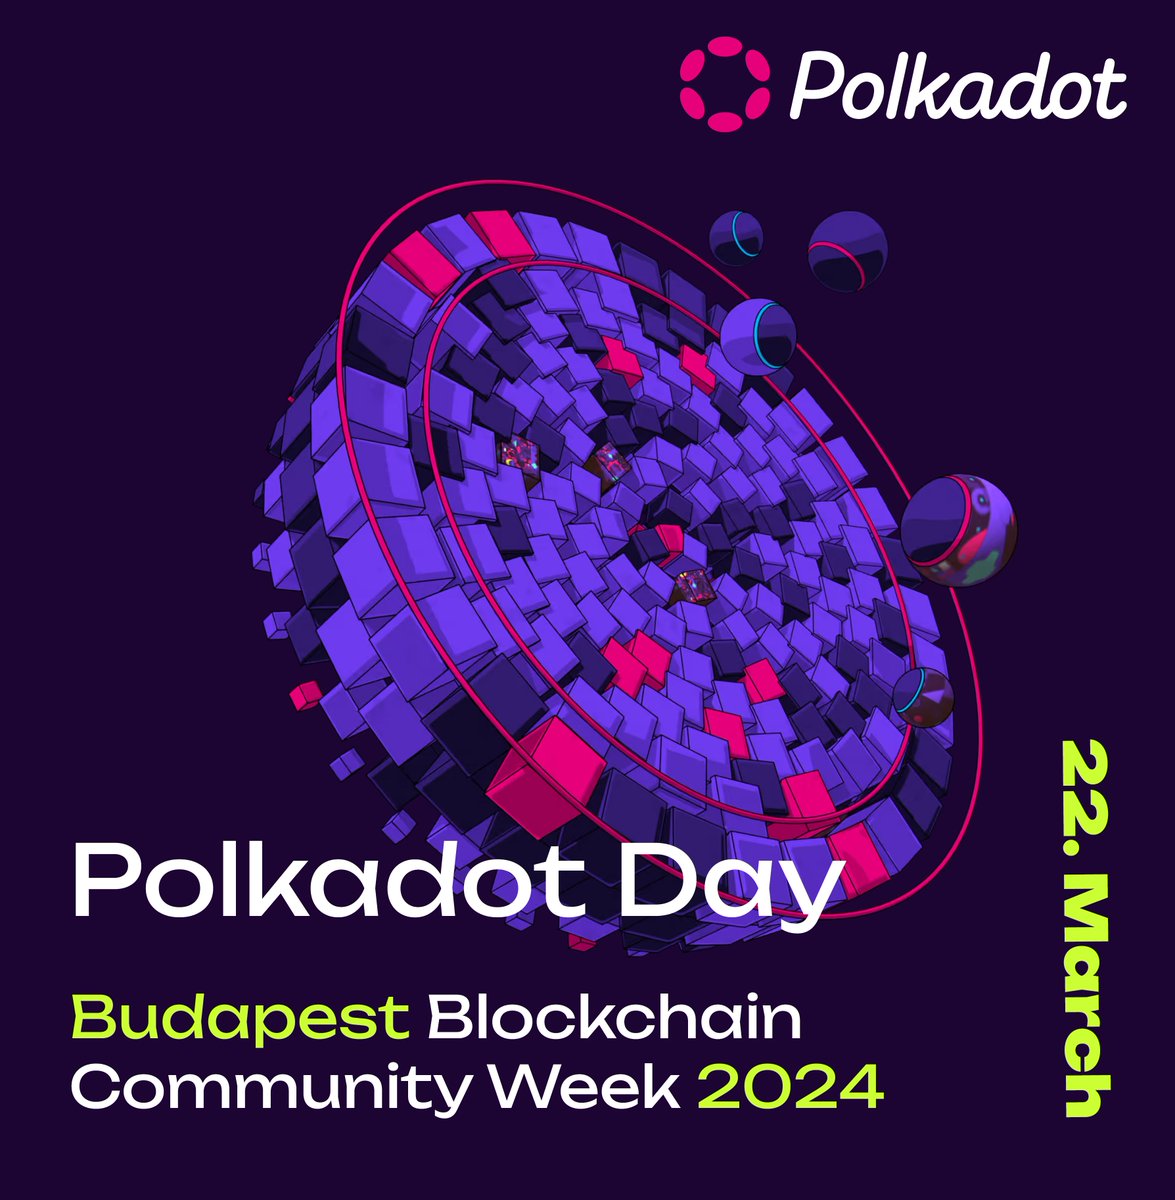 Dear Friends & Polkadot OGs! If you happen to be in #Budapest in the middle of March 2024, join us for our community-organized Blockchain Week, the @BudBlockWeek, and attend the #PolkadotDay on March 22. Talks from nearby @Polkadot communities from Budapest are also welcome! 🎇